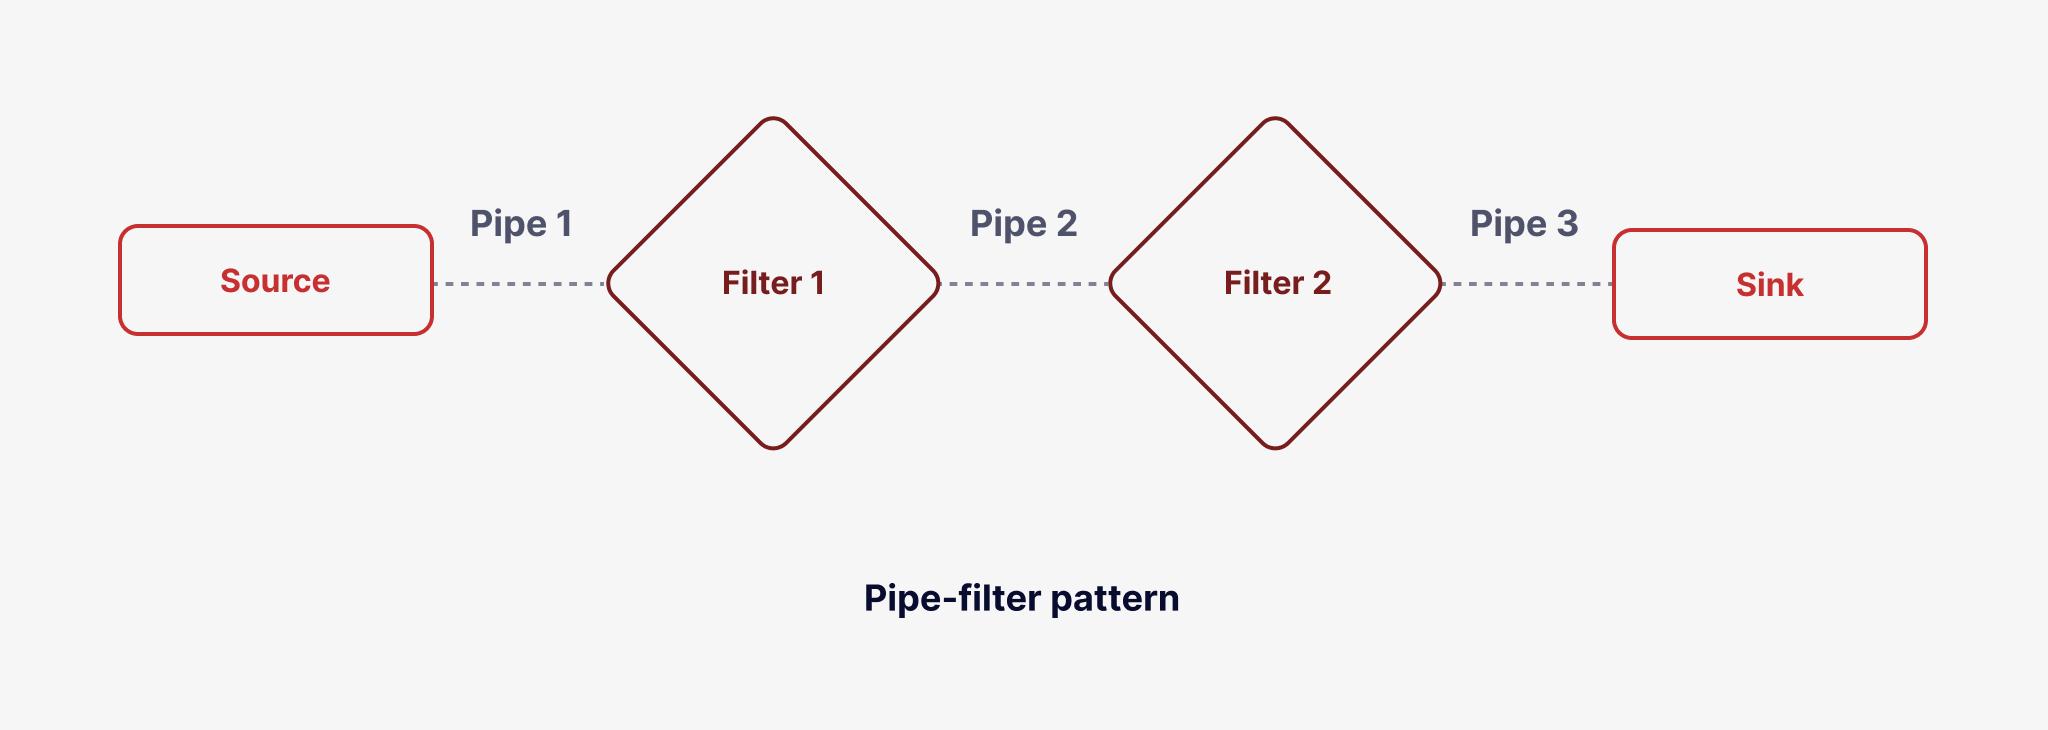 Pipe filter software architecture